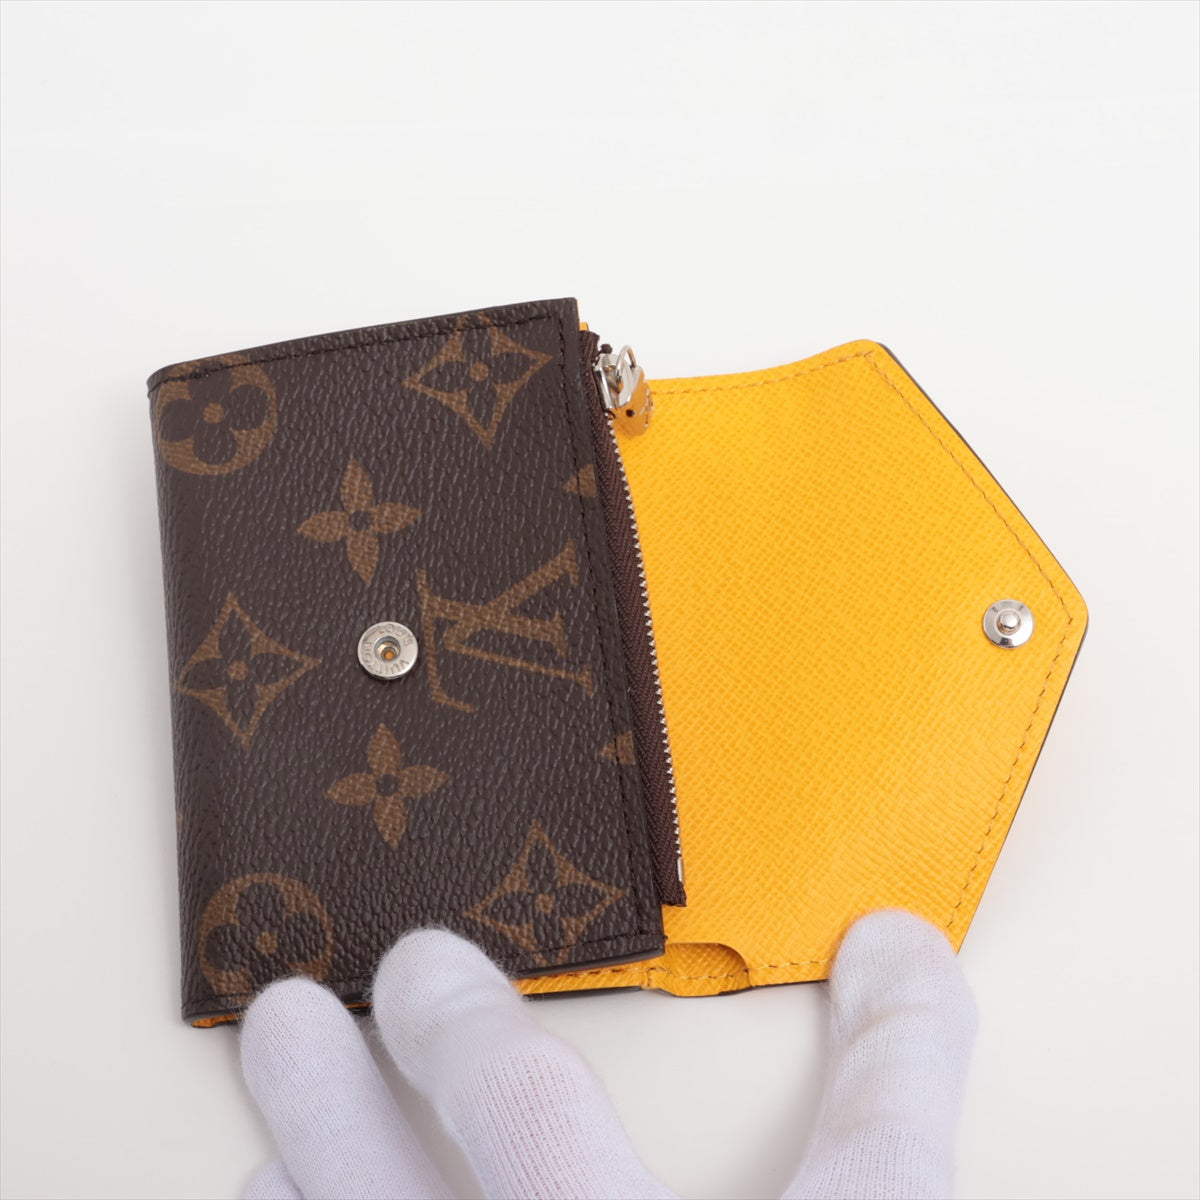 Louis Vuitton Monogram Portefeuille Zoé M82984 M82984 There was an RFID response